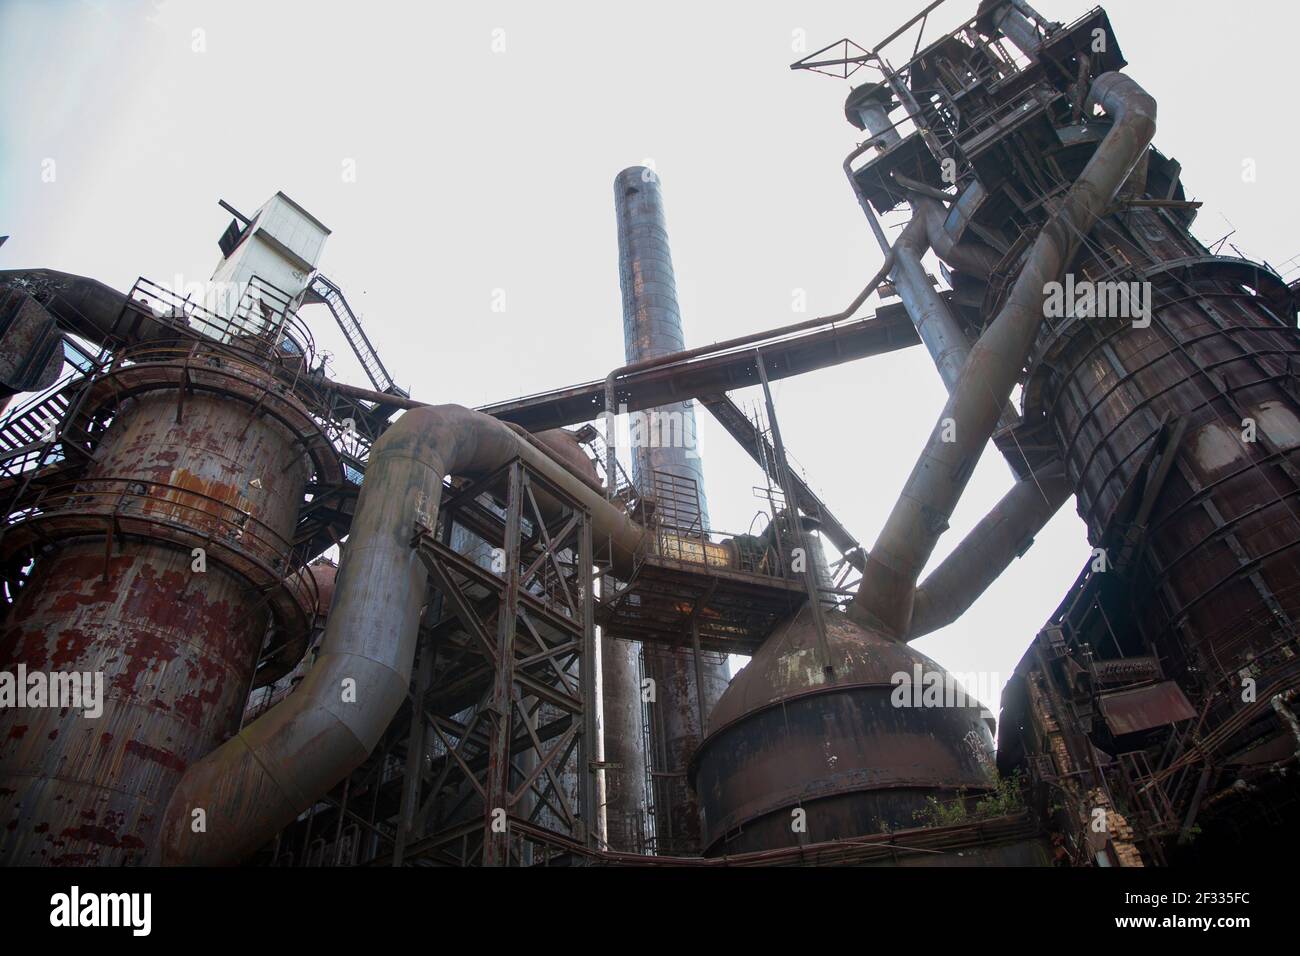 A view of the industrial machinery and pipes at the Carrie Furnace In Pittsburgh PA USA Stock Photo